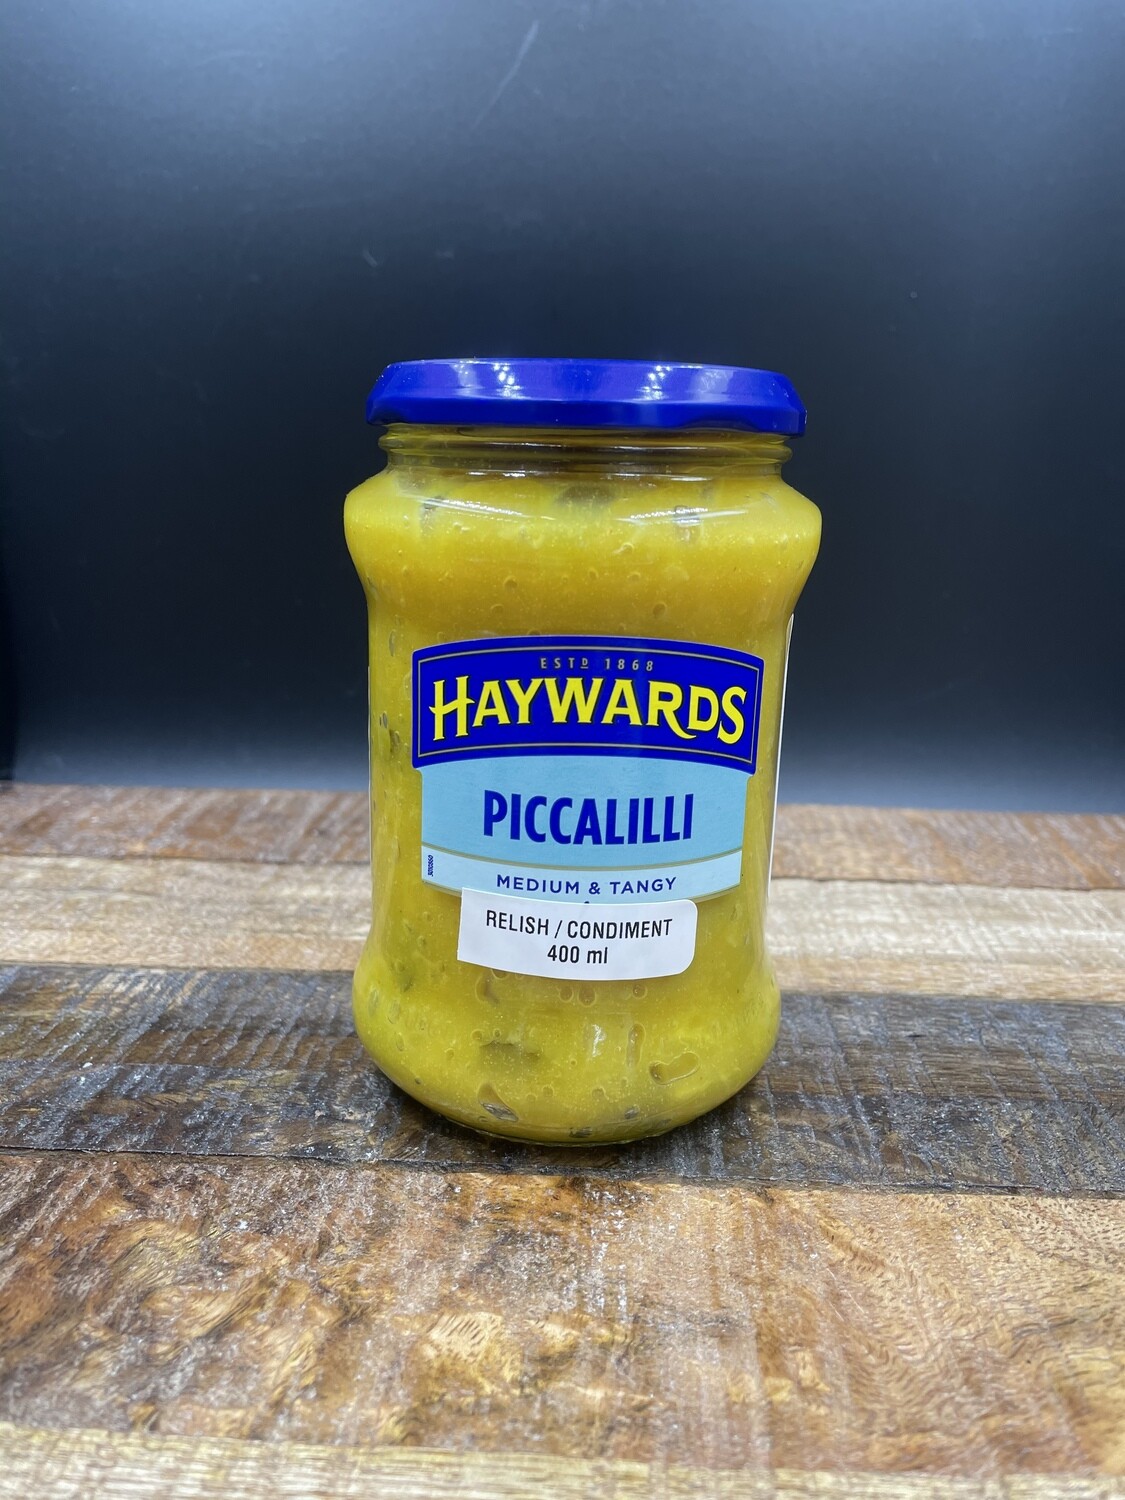 Haywards Piccalilli Medium And Tangy 400g